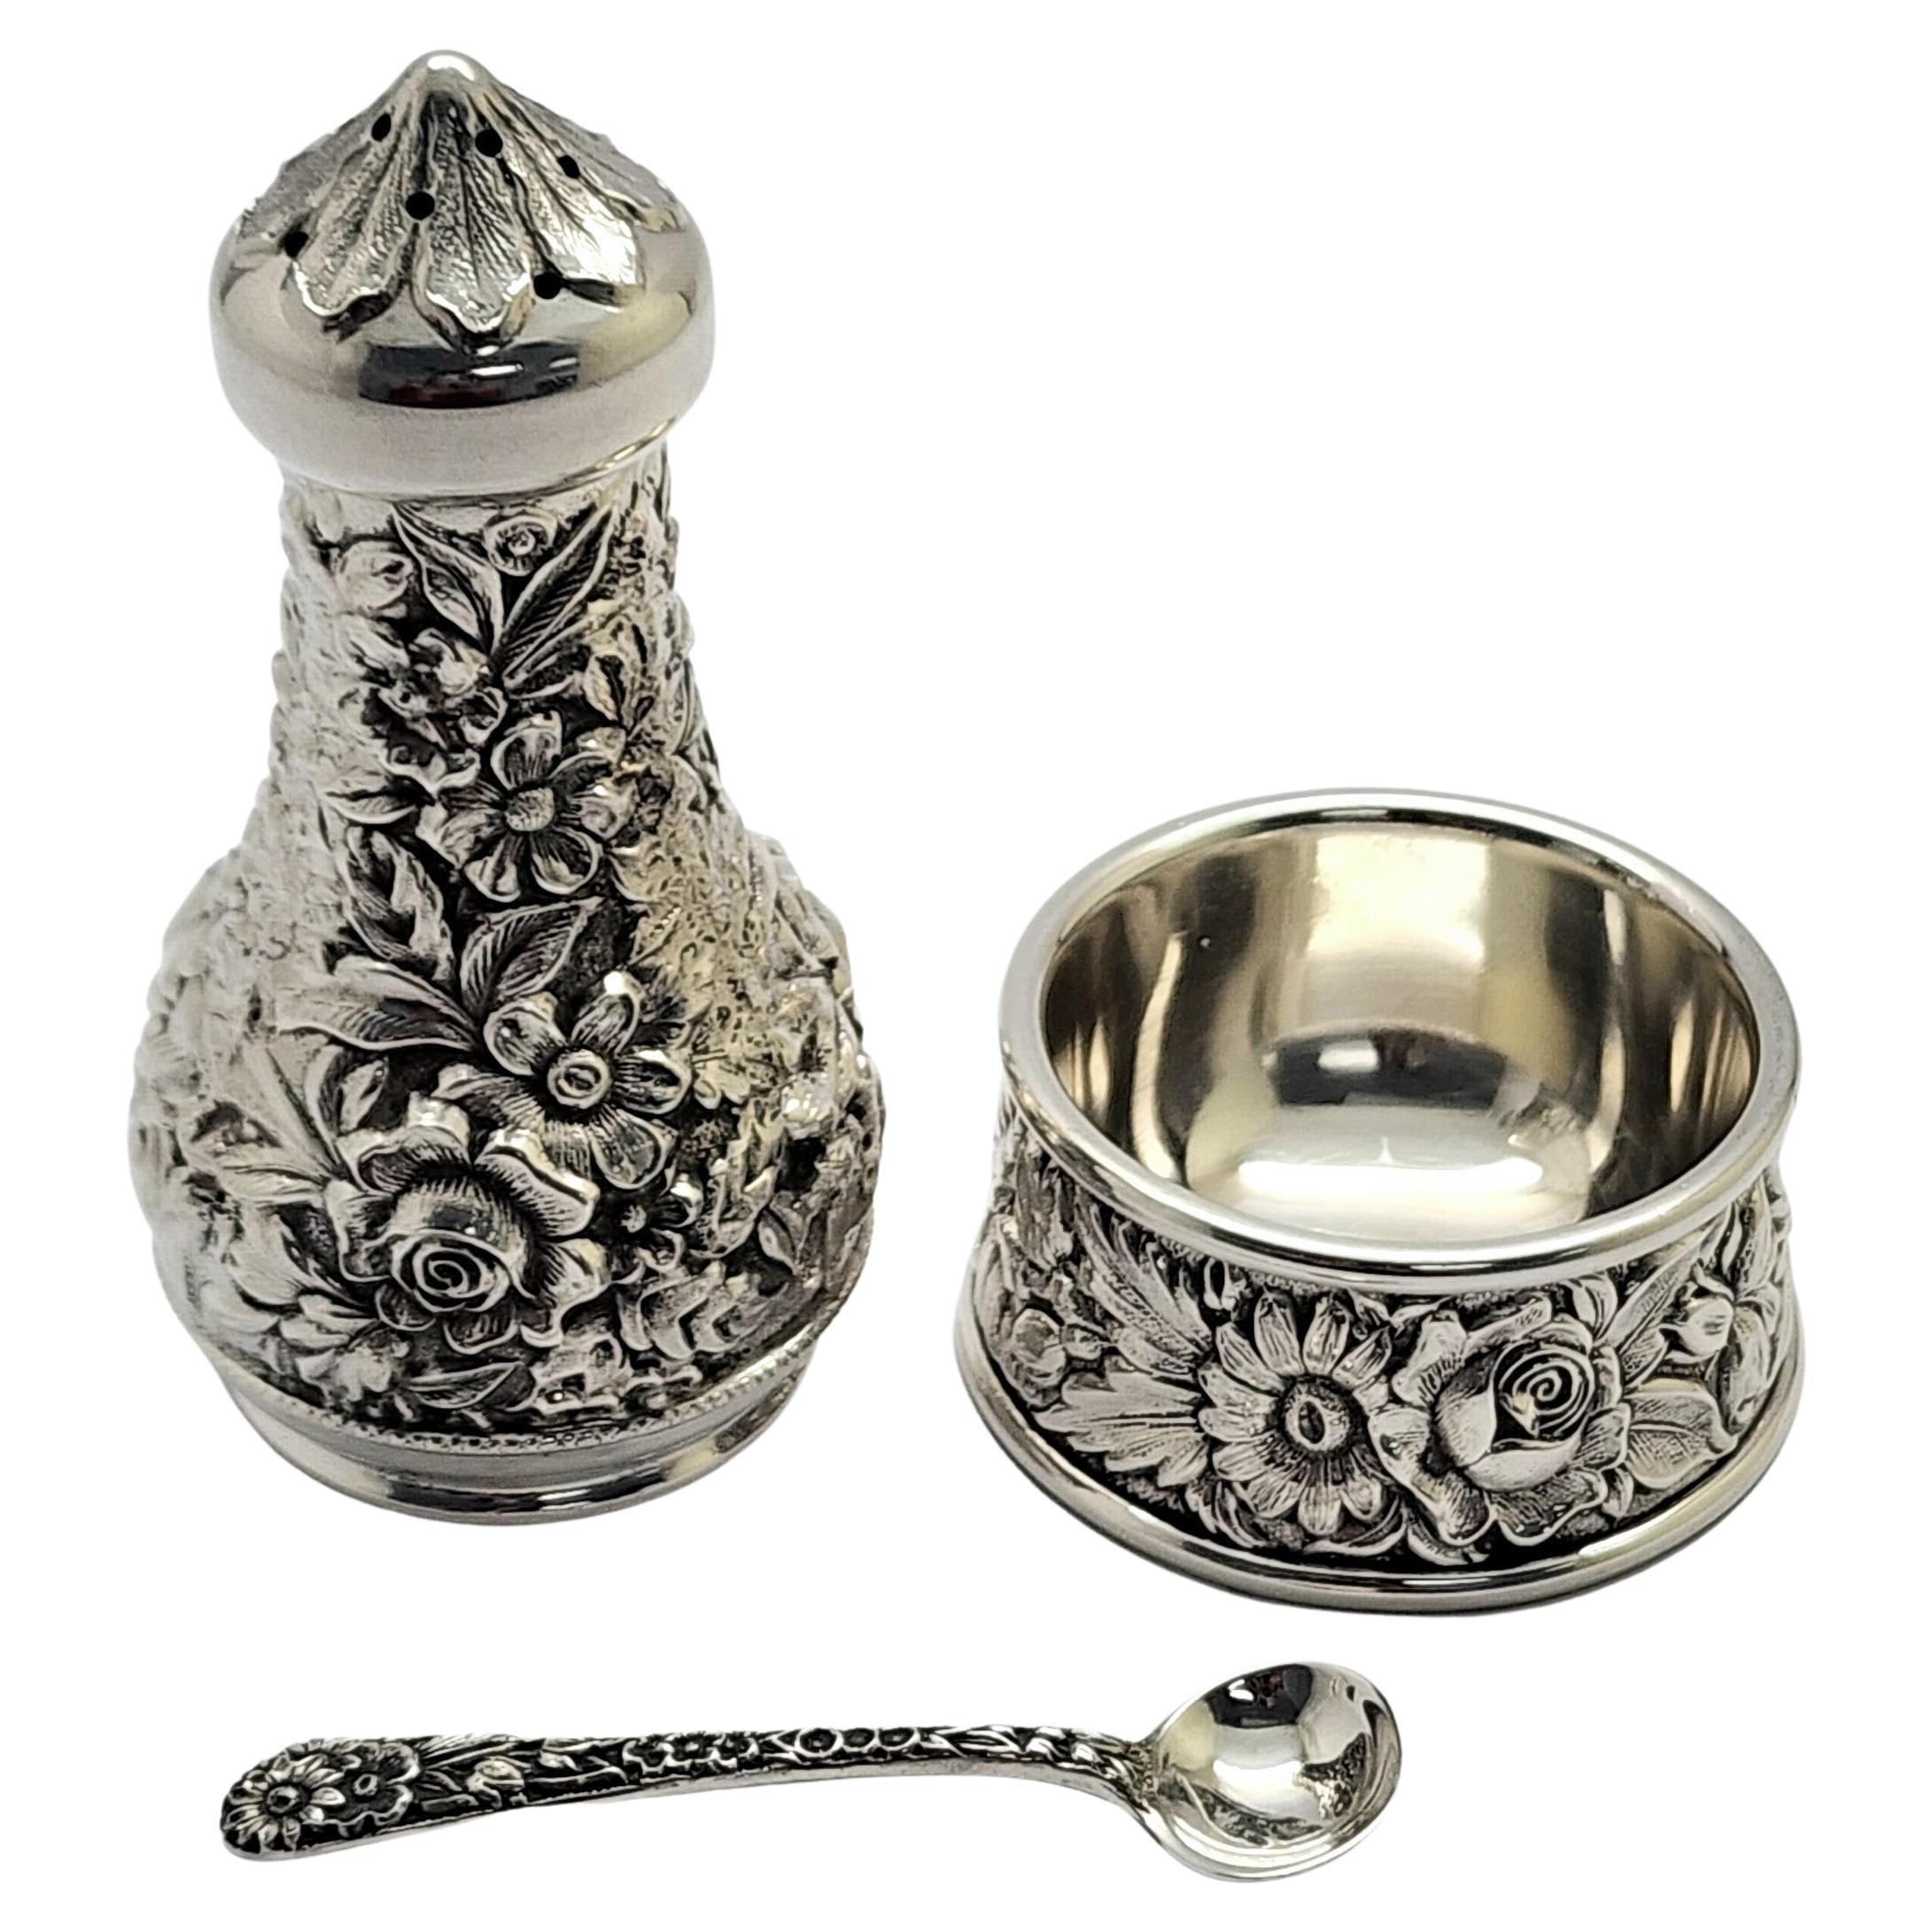 S Kirk & Son Sterling 59A Repousse Salt Cellar with Spoon and Pepper Shaker